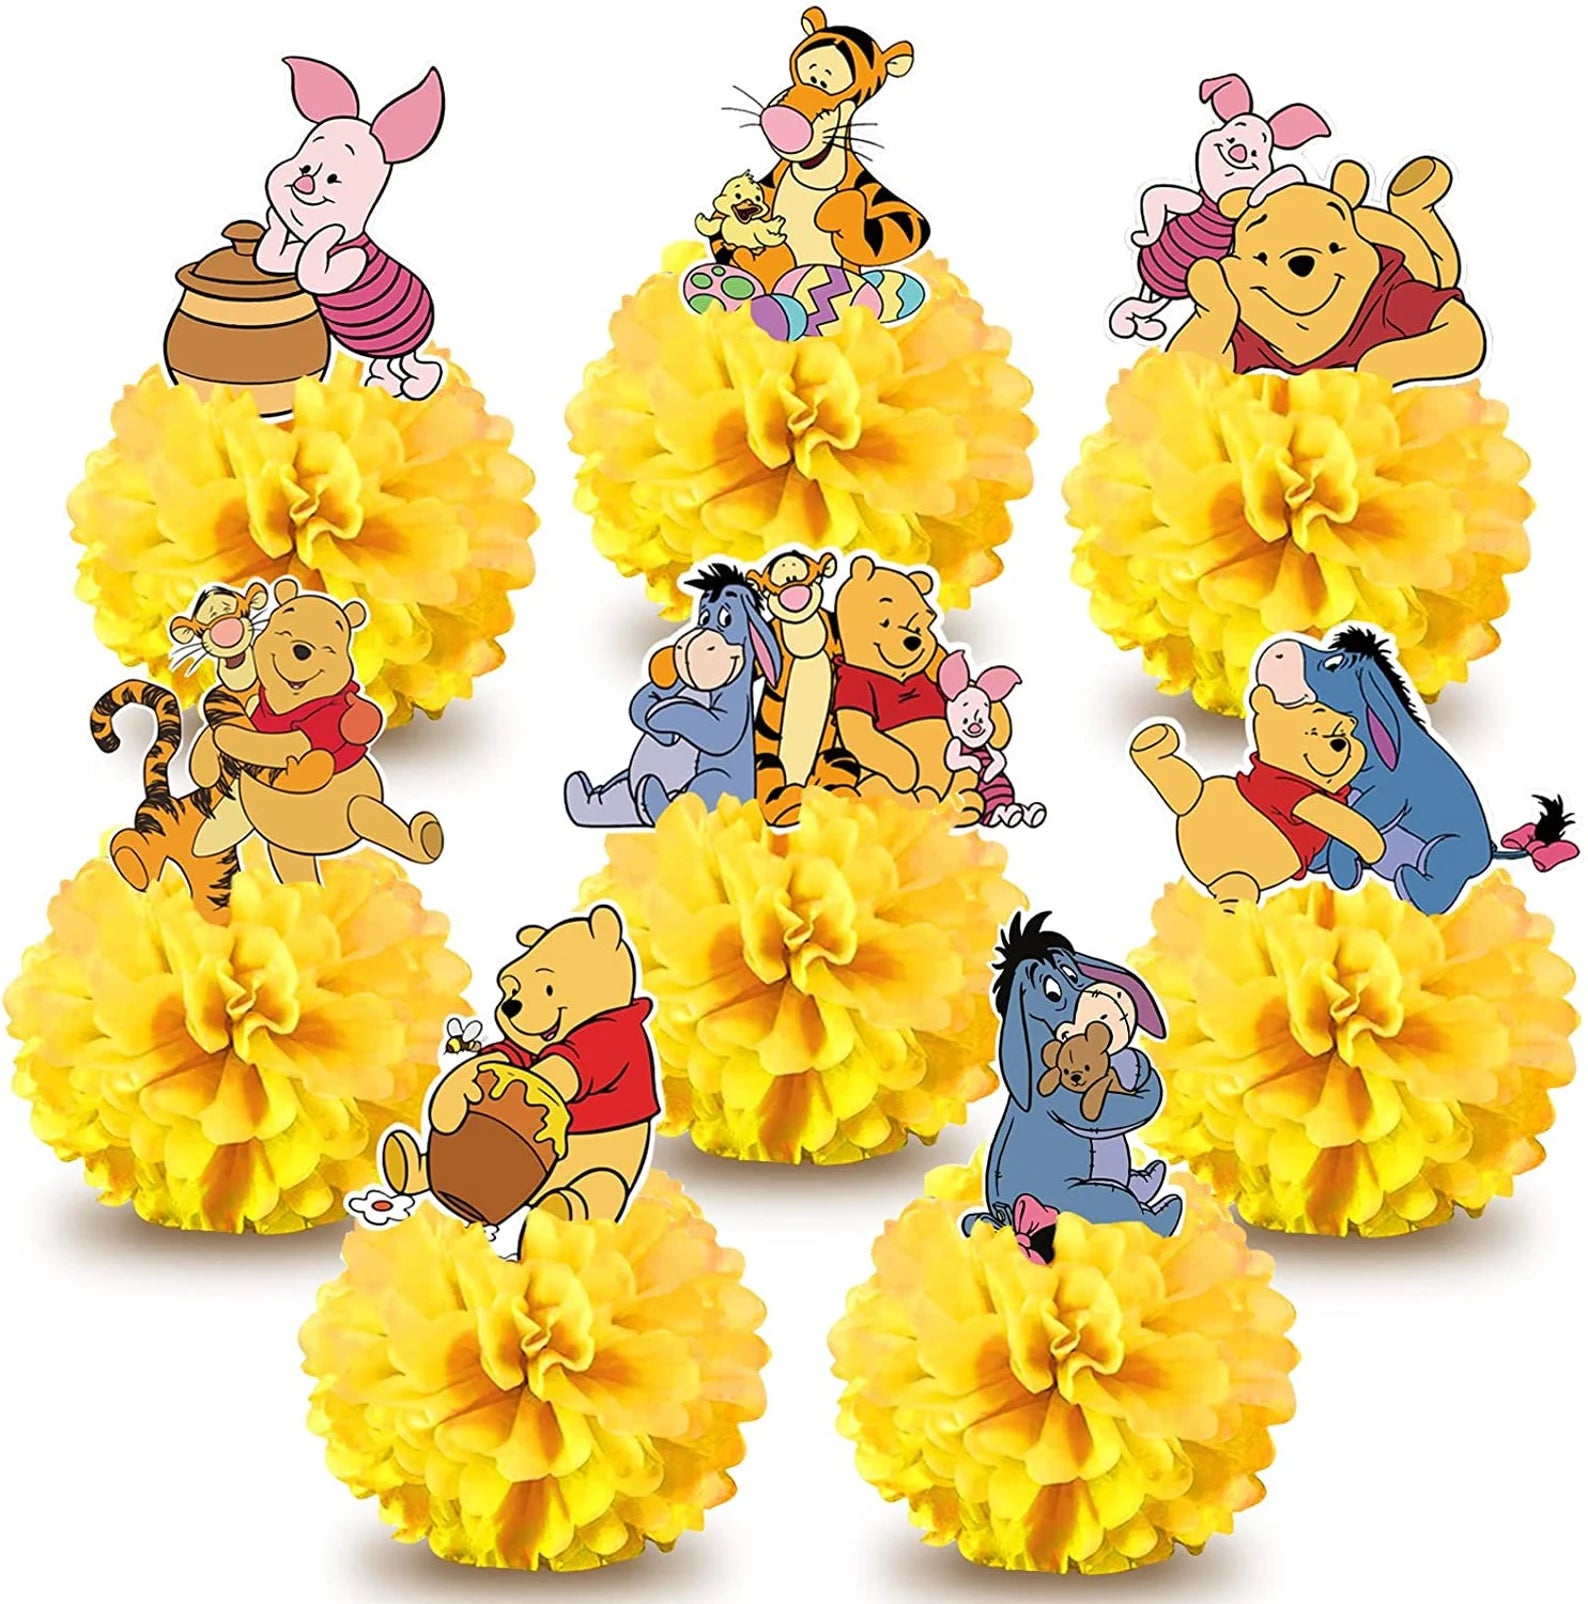 Winnie the Pooh 6pcs Centerpieces – Ready 4 Your Party